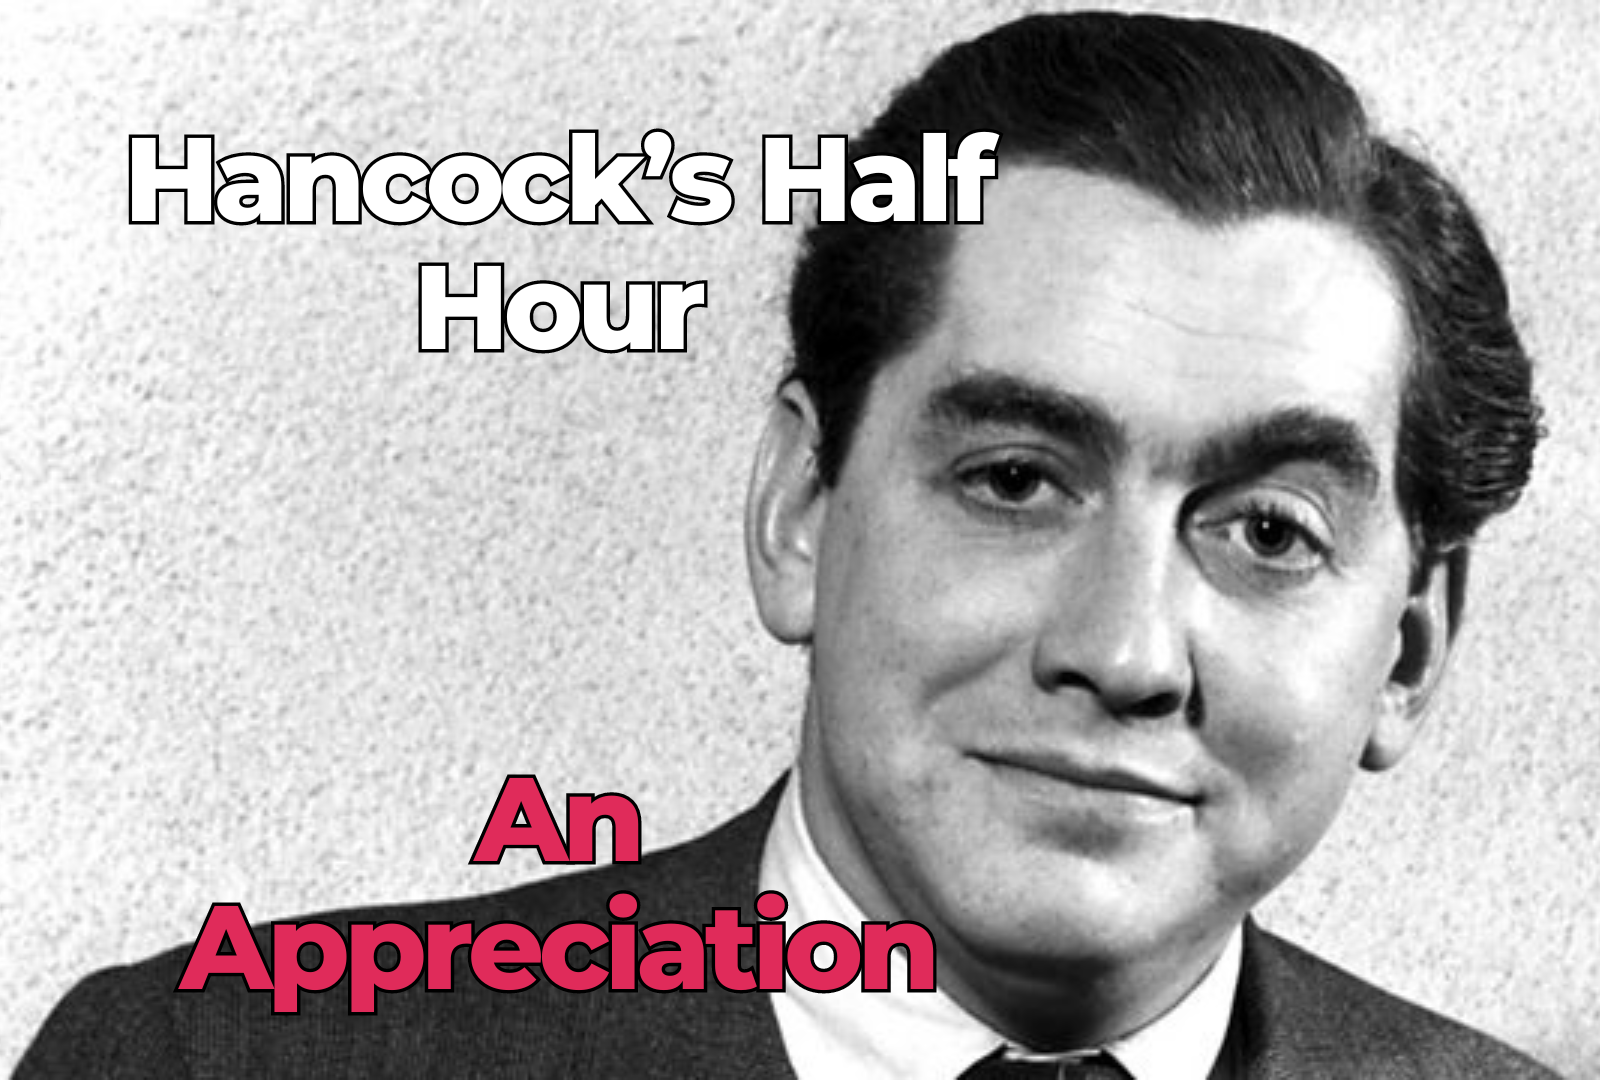 A picture of Tony Hancock with the words 'Hancocks Half Hour - An Appreciation' overlaid.